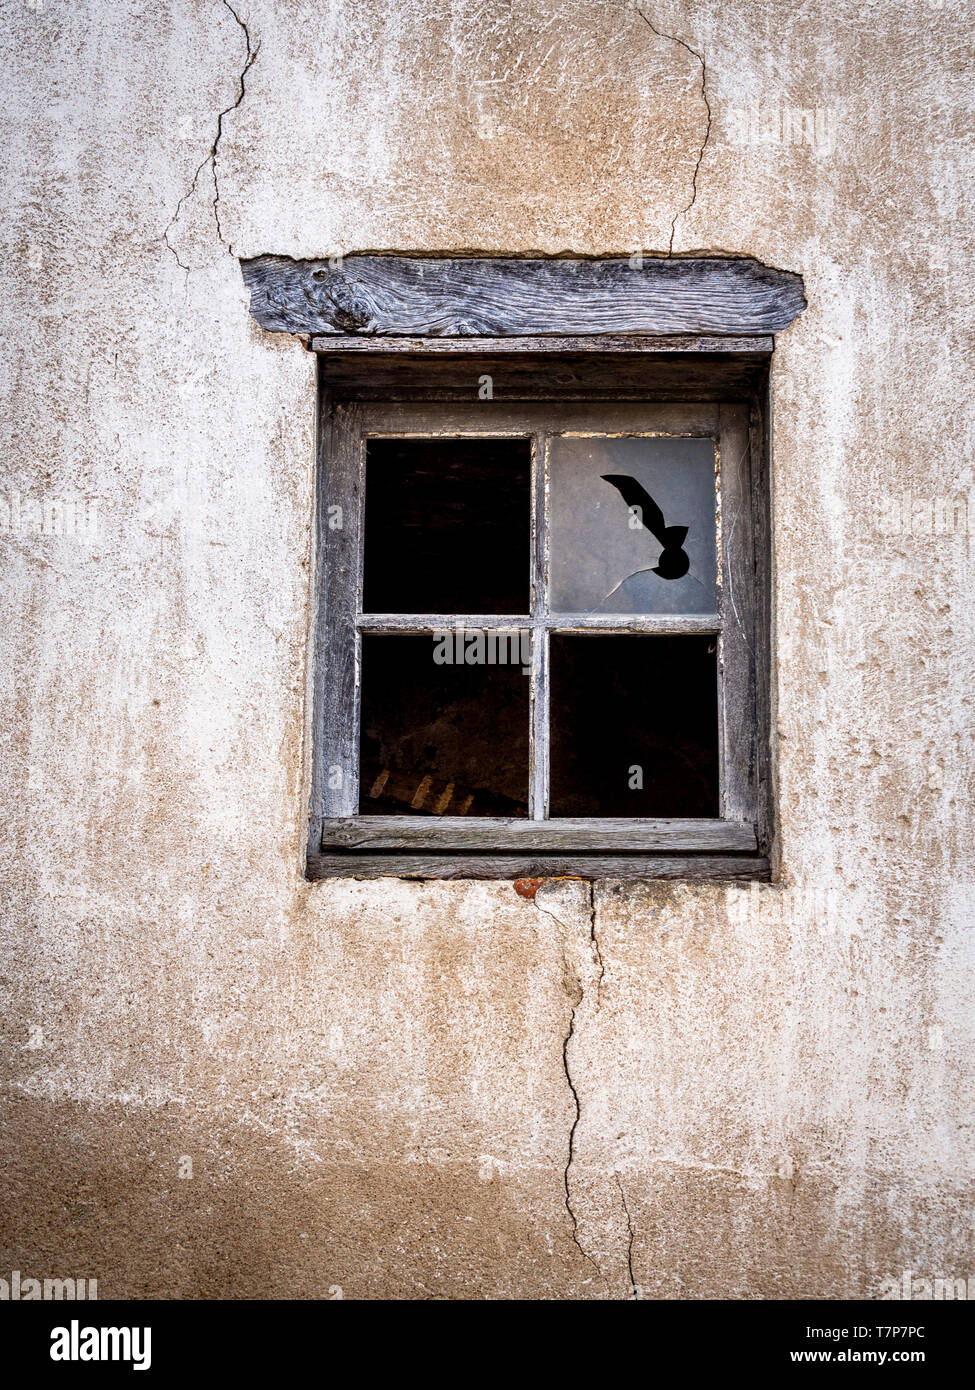 Cracked facade and old window without glass Stock Photo